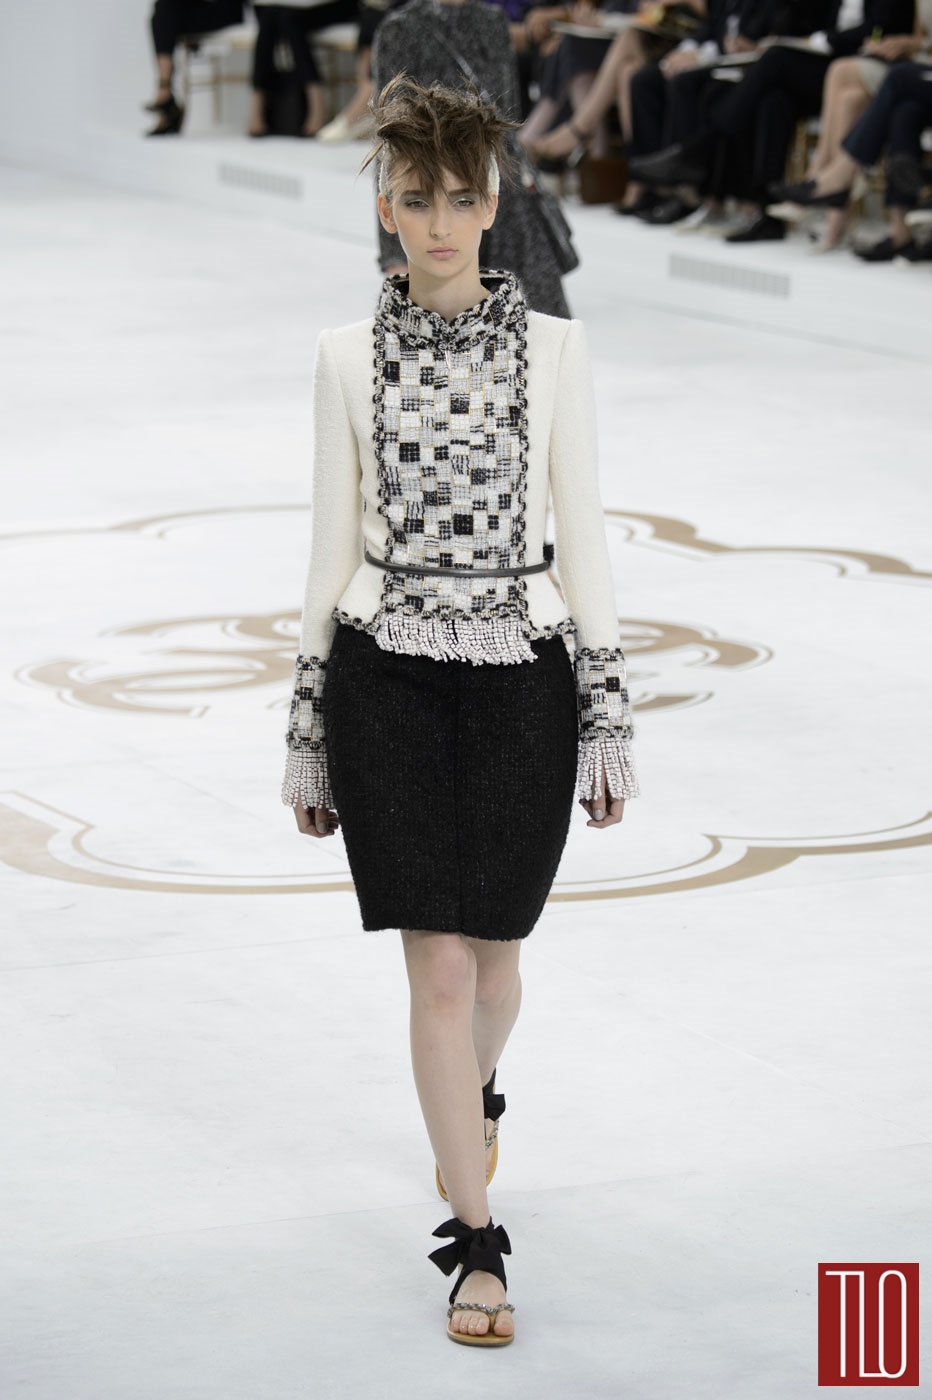 Chanel-Fall-2014-Couture-Collection-Paris-Tom-Lorenzo-Site-TLO (1)